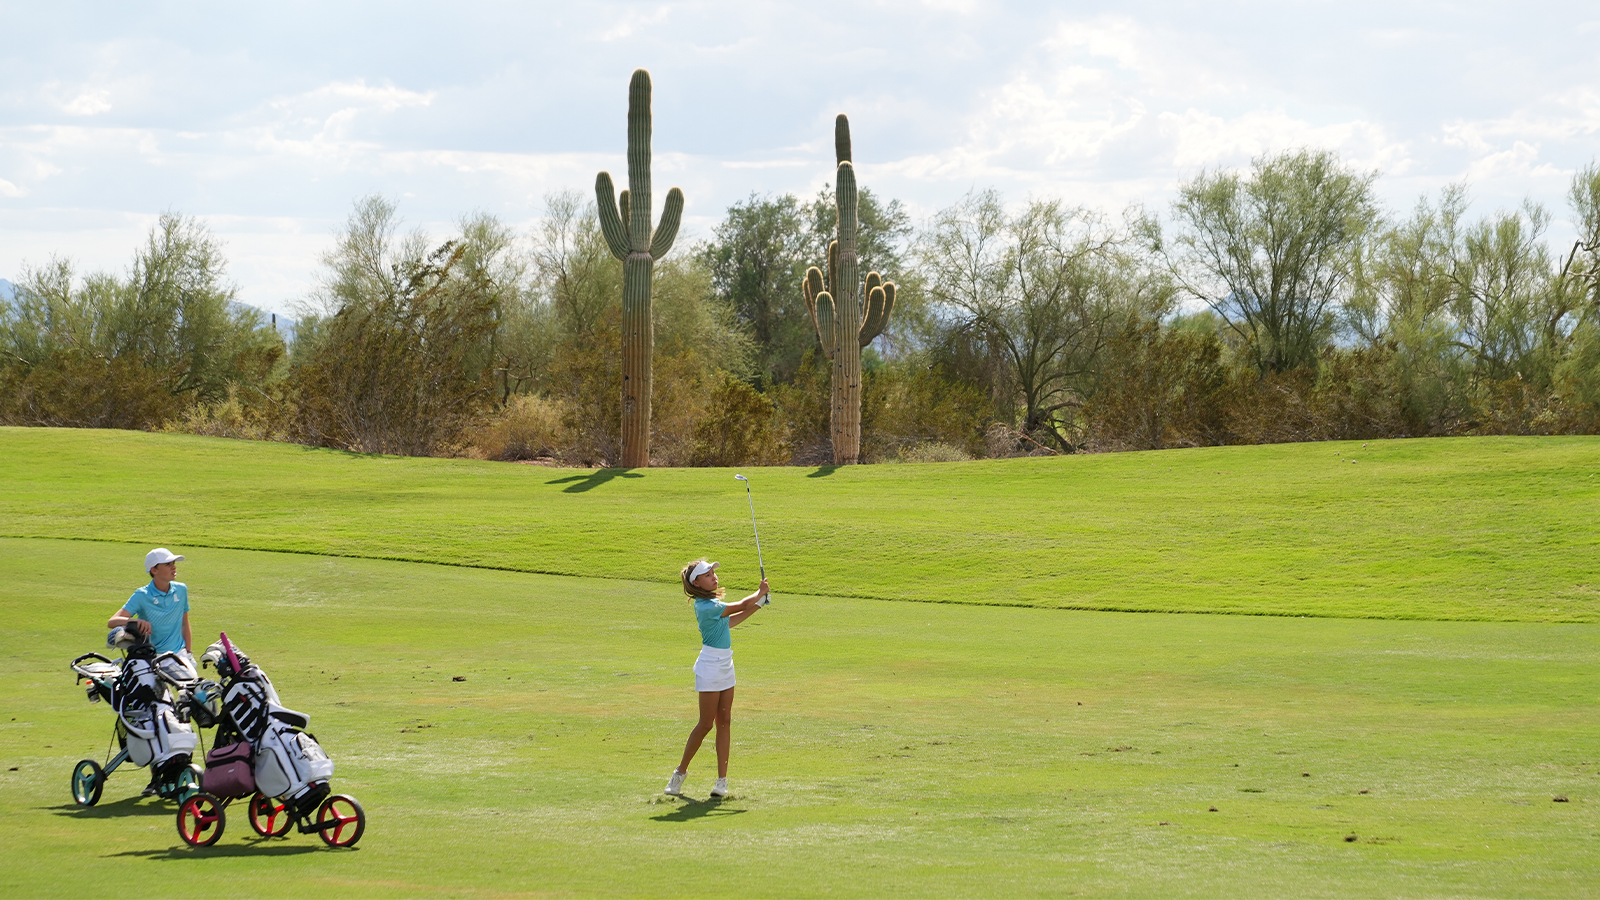 Victoria Cui of Team Illinois hits her shot during the second round of the 2022 National Car Rental PGA Jr. League Championship at Grayhawk Golf Club on October 8, 2022 in Scottsdale, Arizona. (Photo by Darren Carroll/PGA of America)